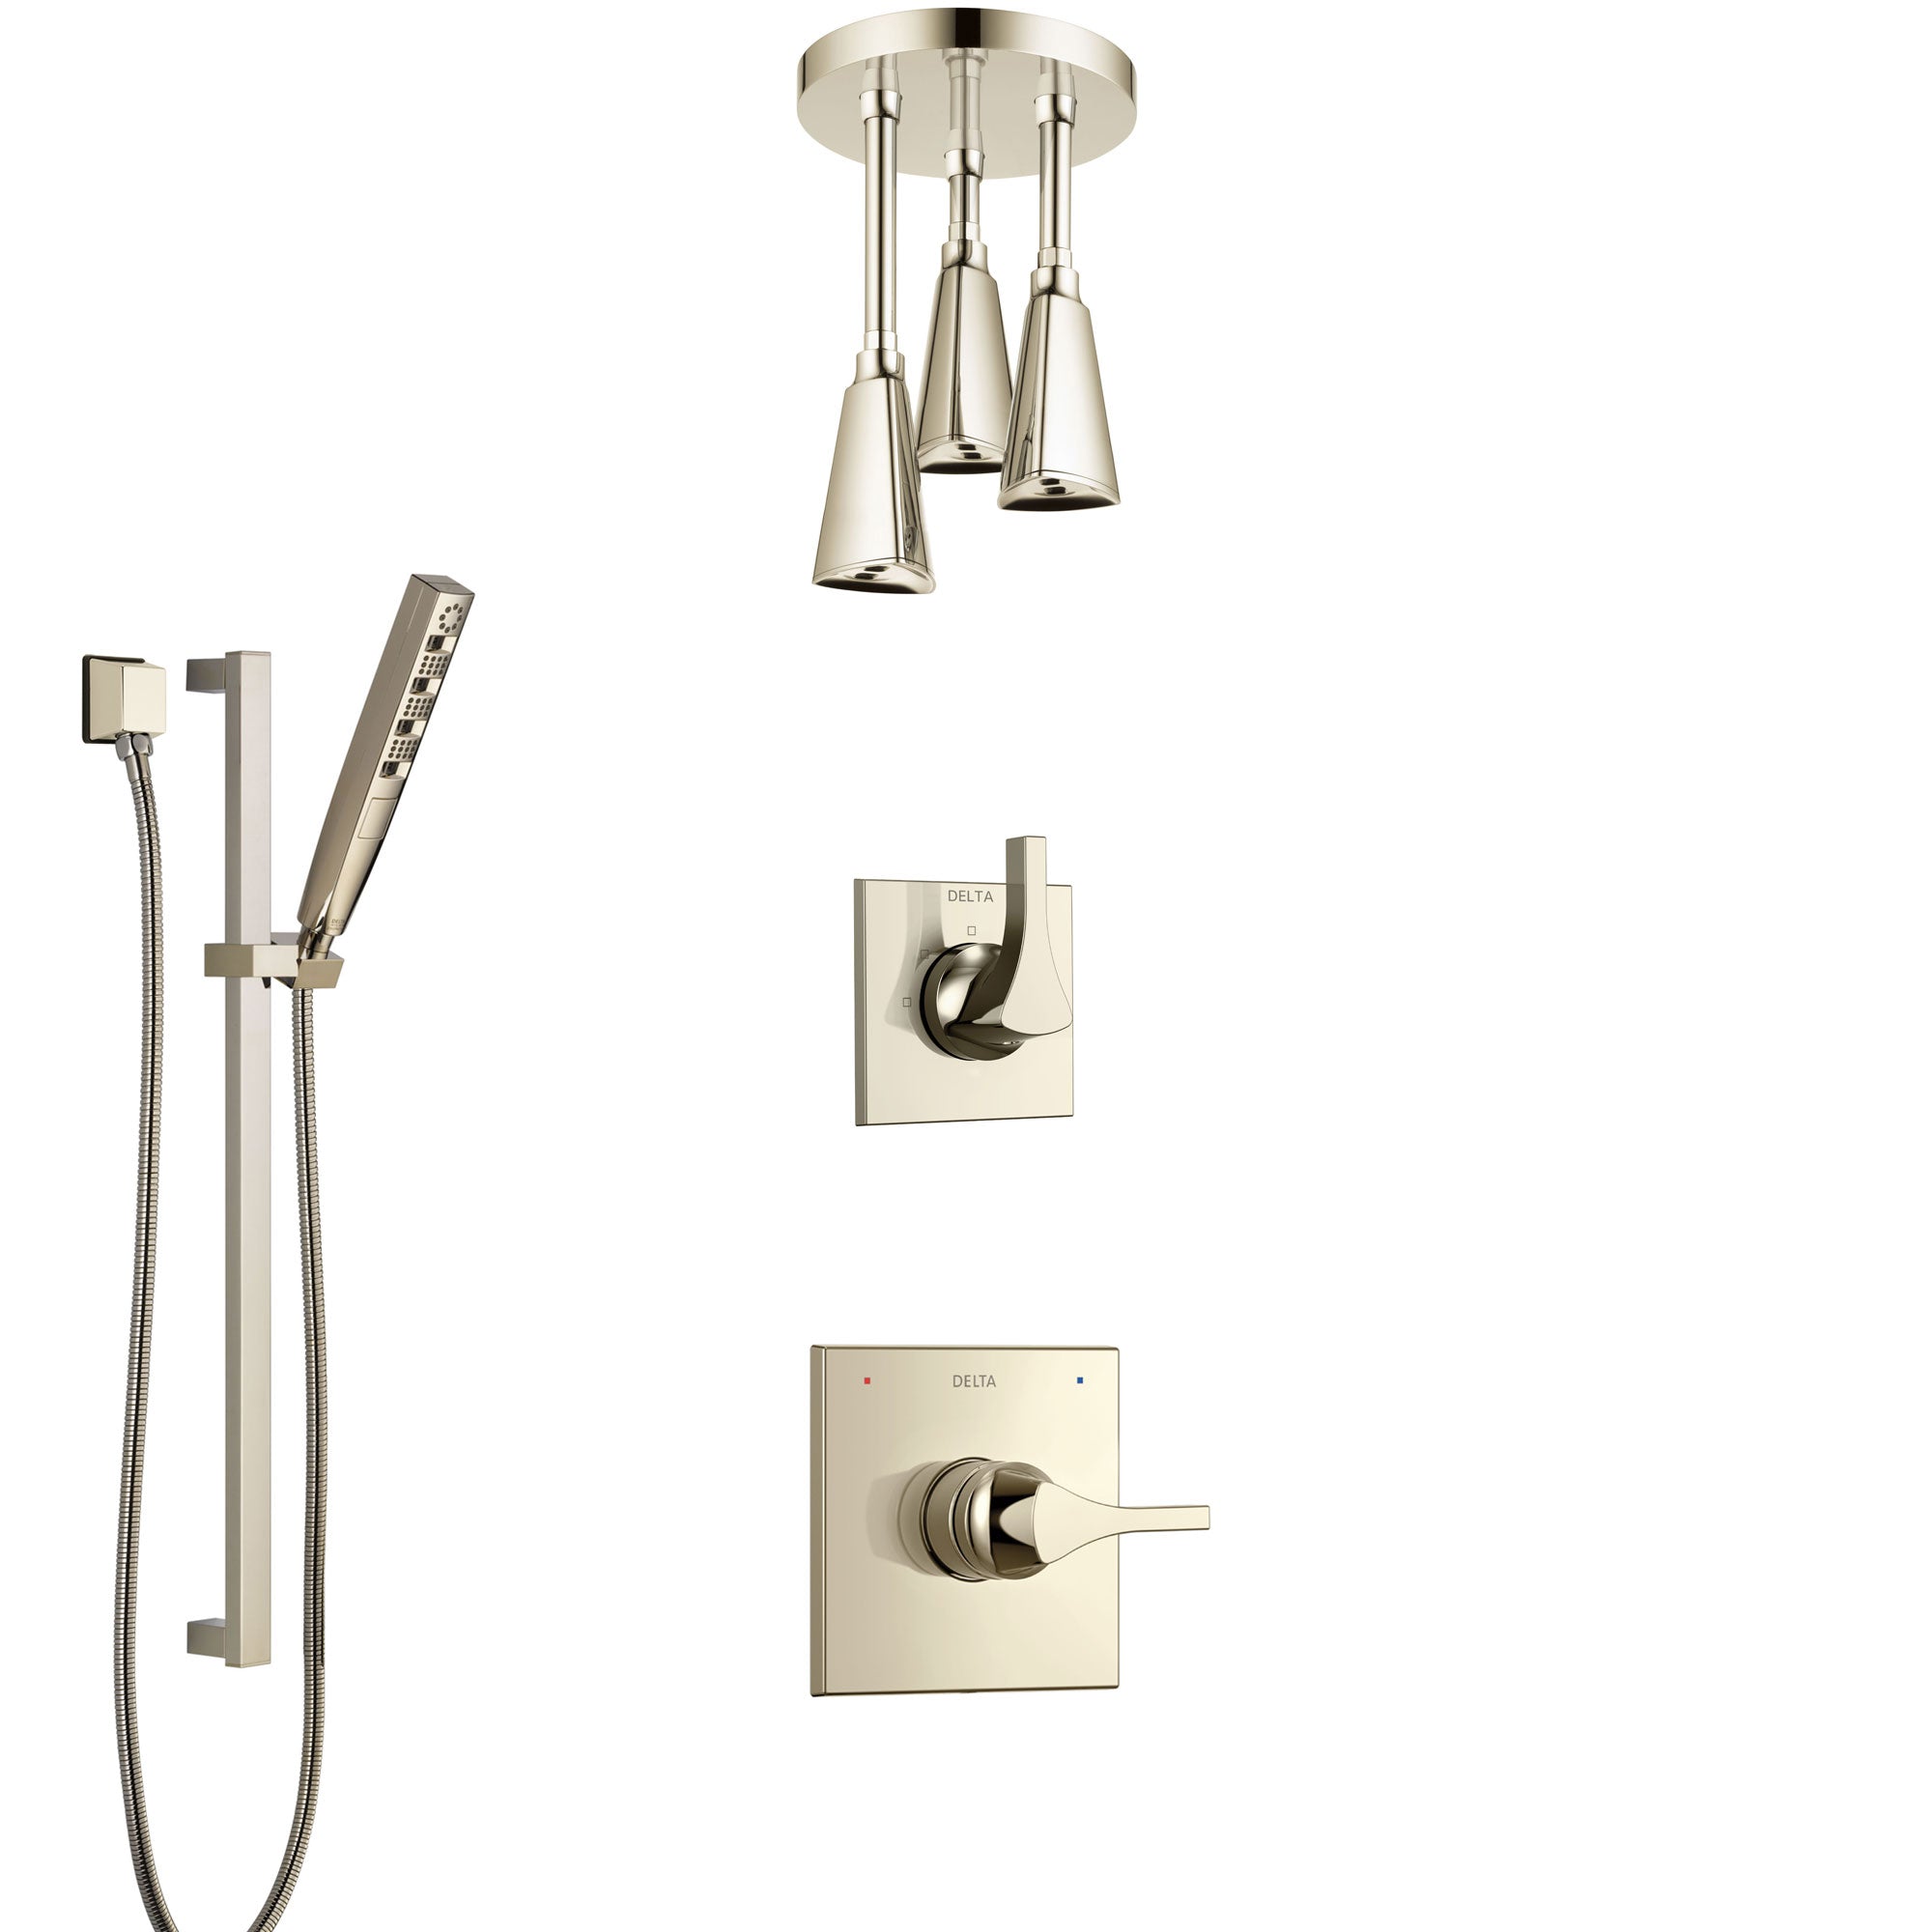 Delta Zura Polished Nickel Shower System with Control Handle, 3-Setting Diverter, Ceiling Mount Showerhead, and Hand Shower with Slidebar SS1474PN6